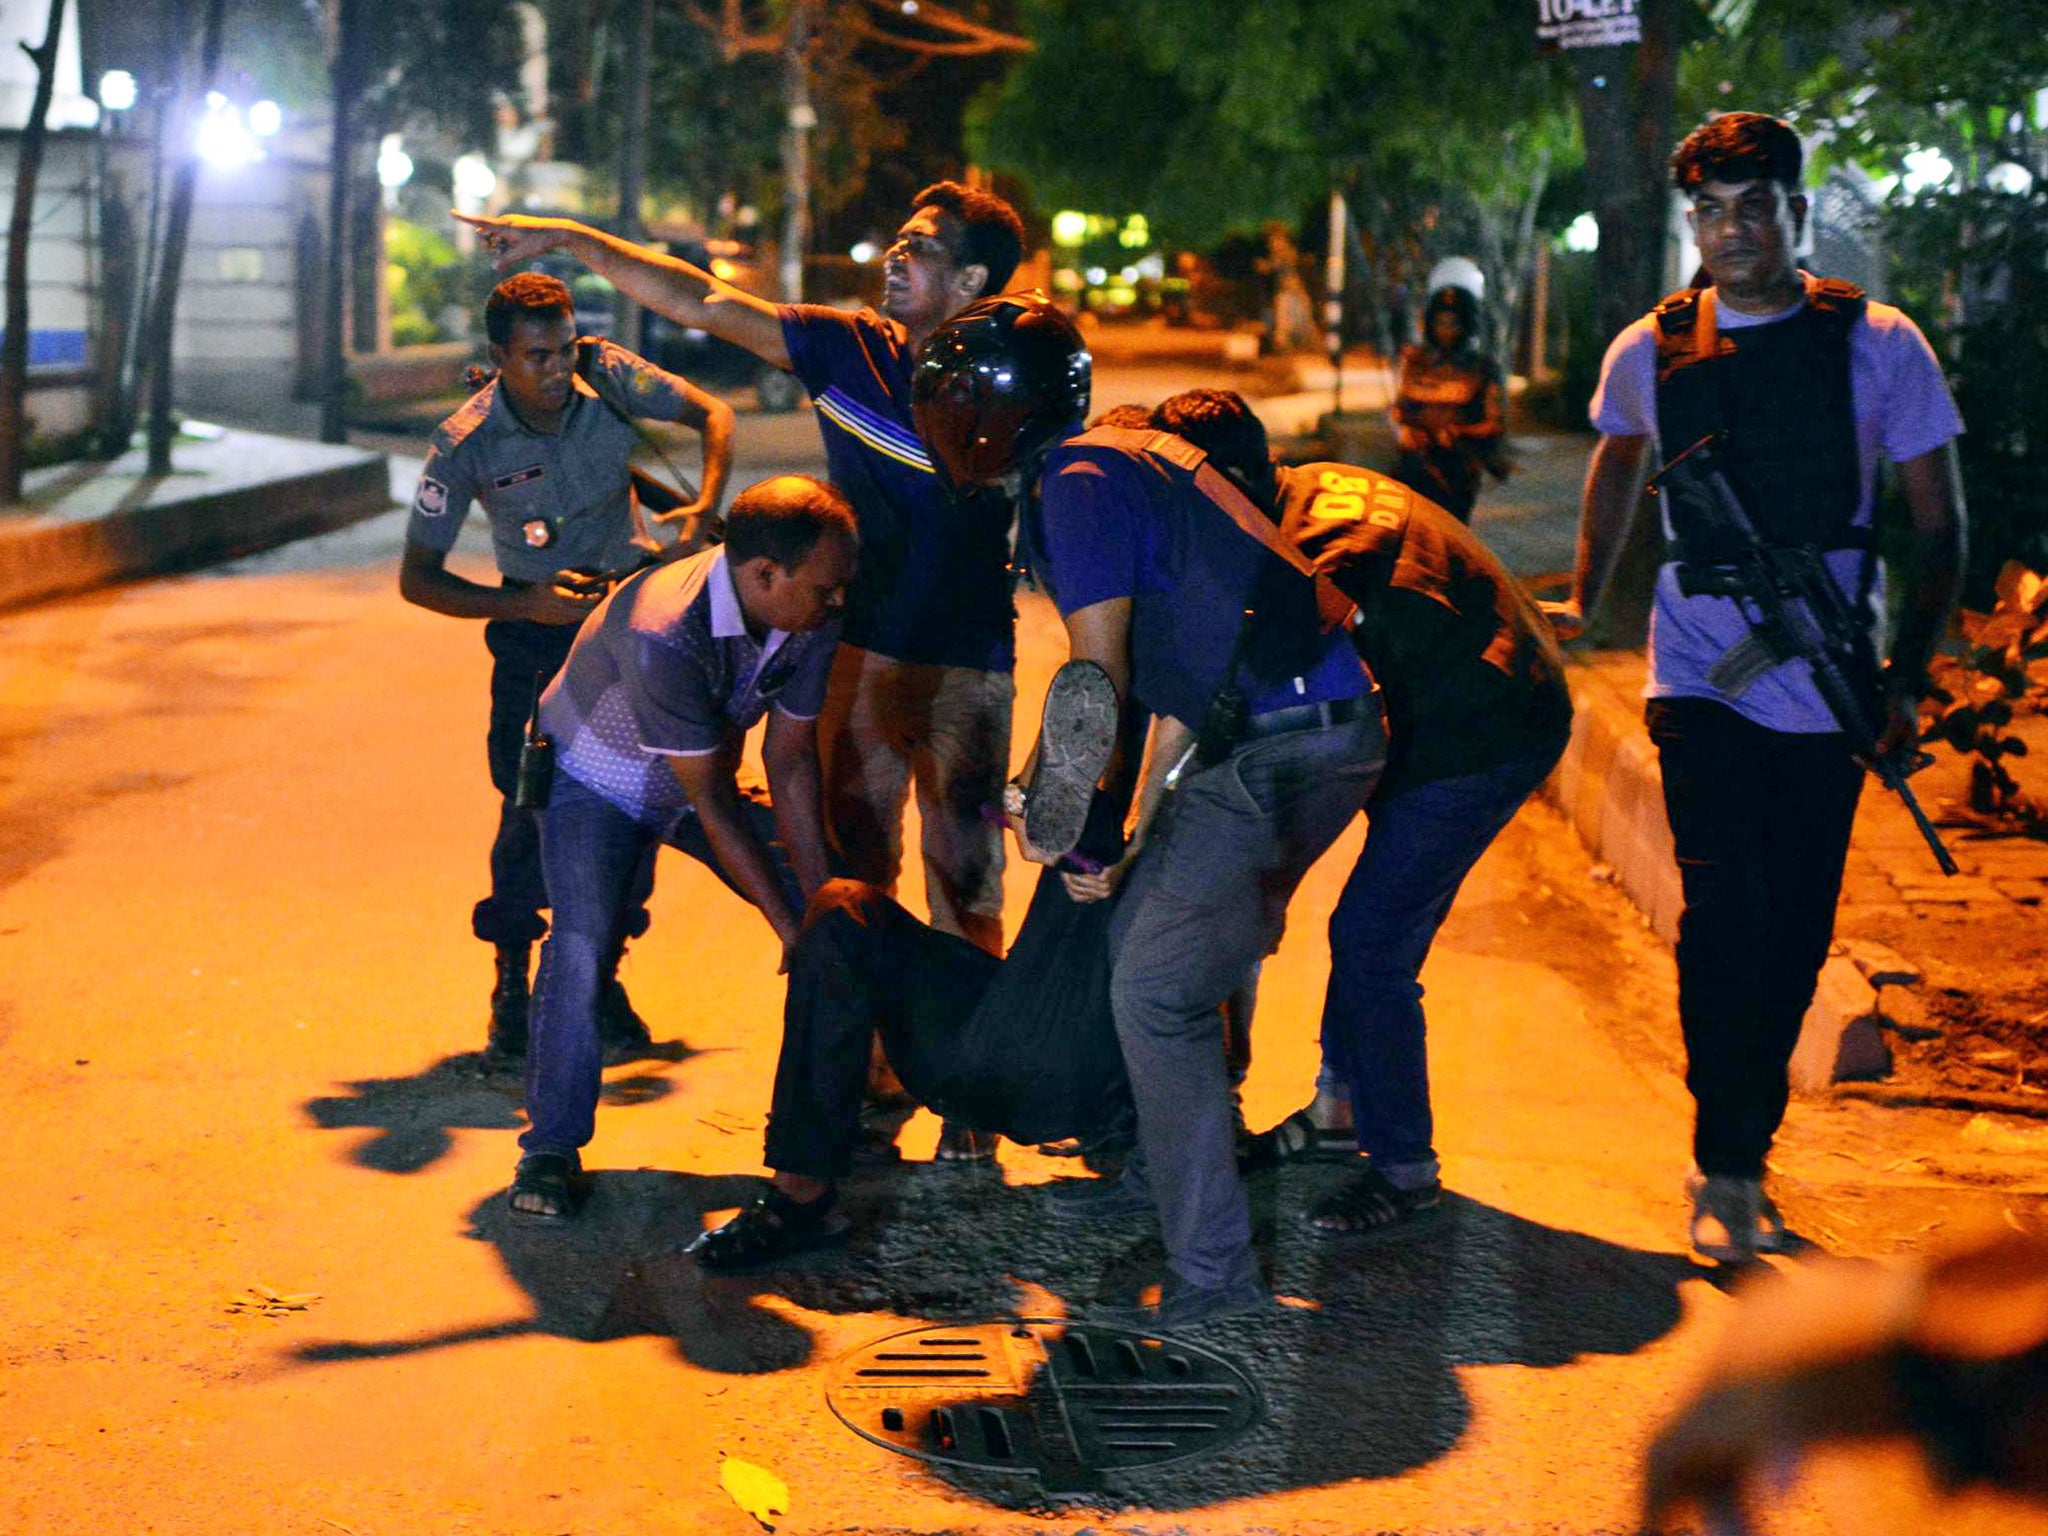 People help an injured person after a group of gunmen attacked a restaurant popular with foreigners in Dhaka, Bangladesh